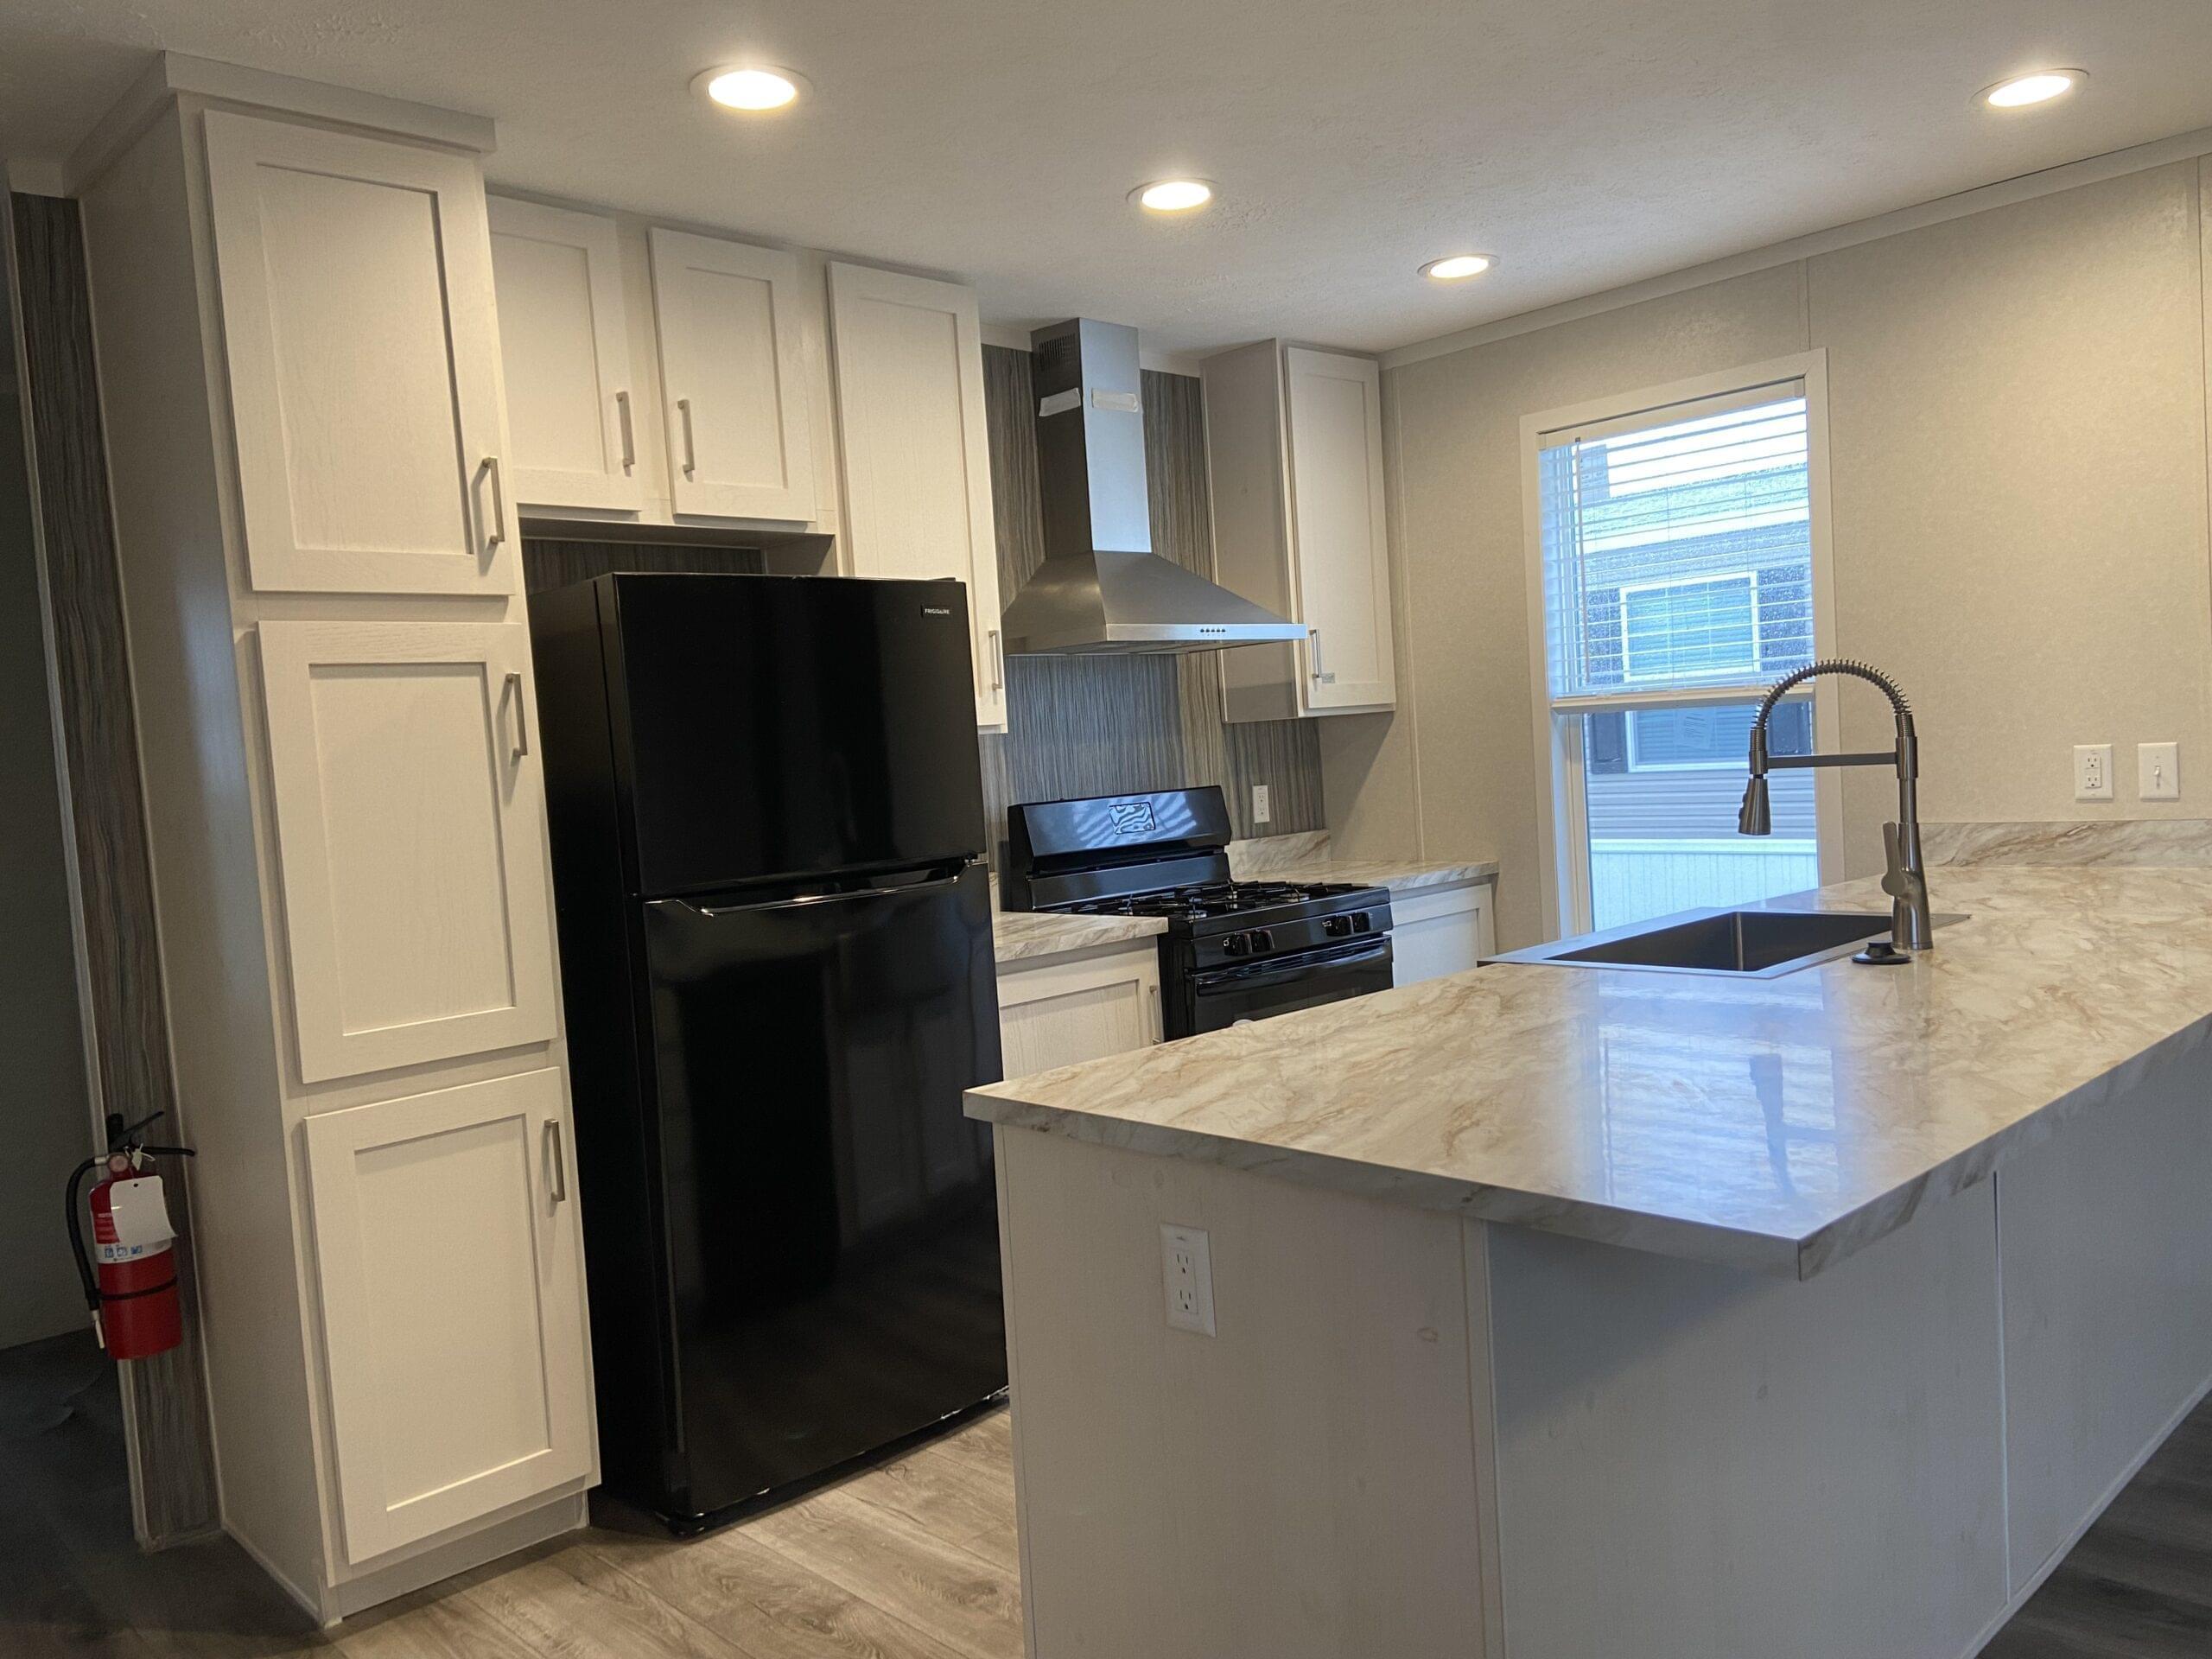 BRAND NEW – MOVE-IN READY!